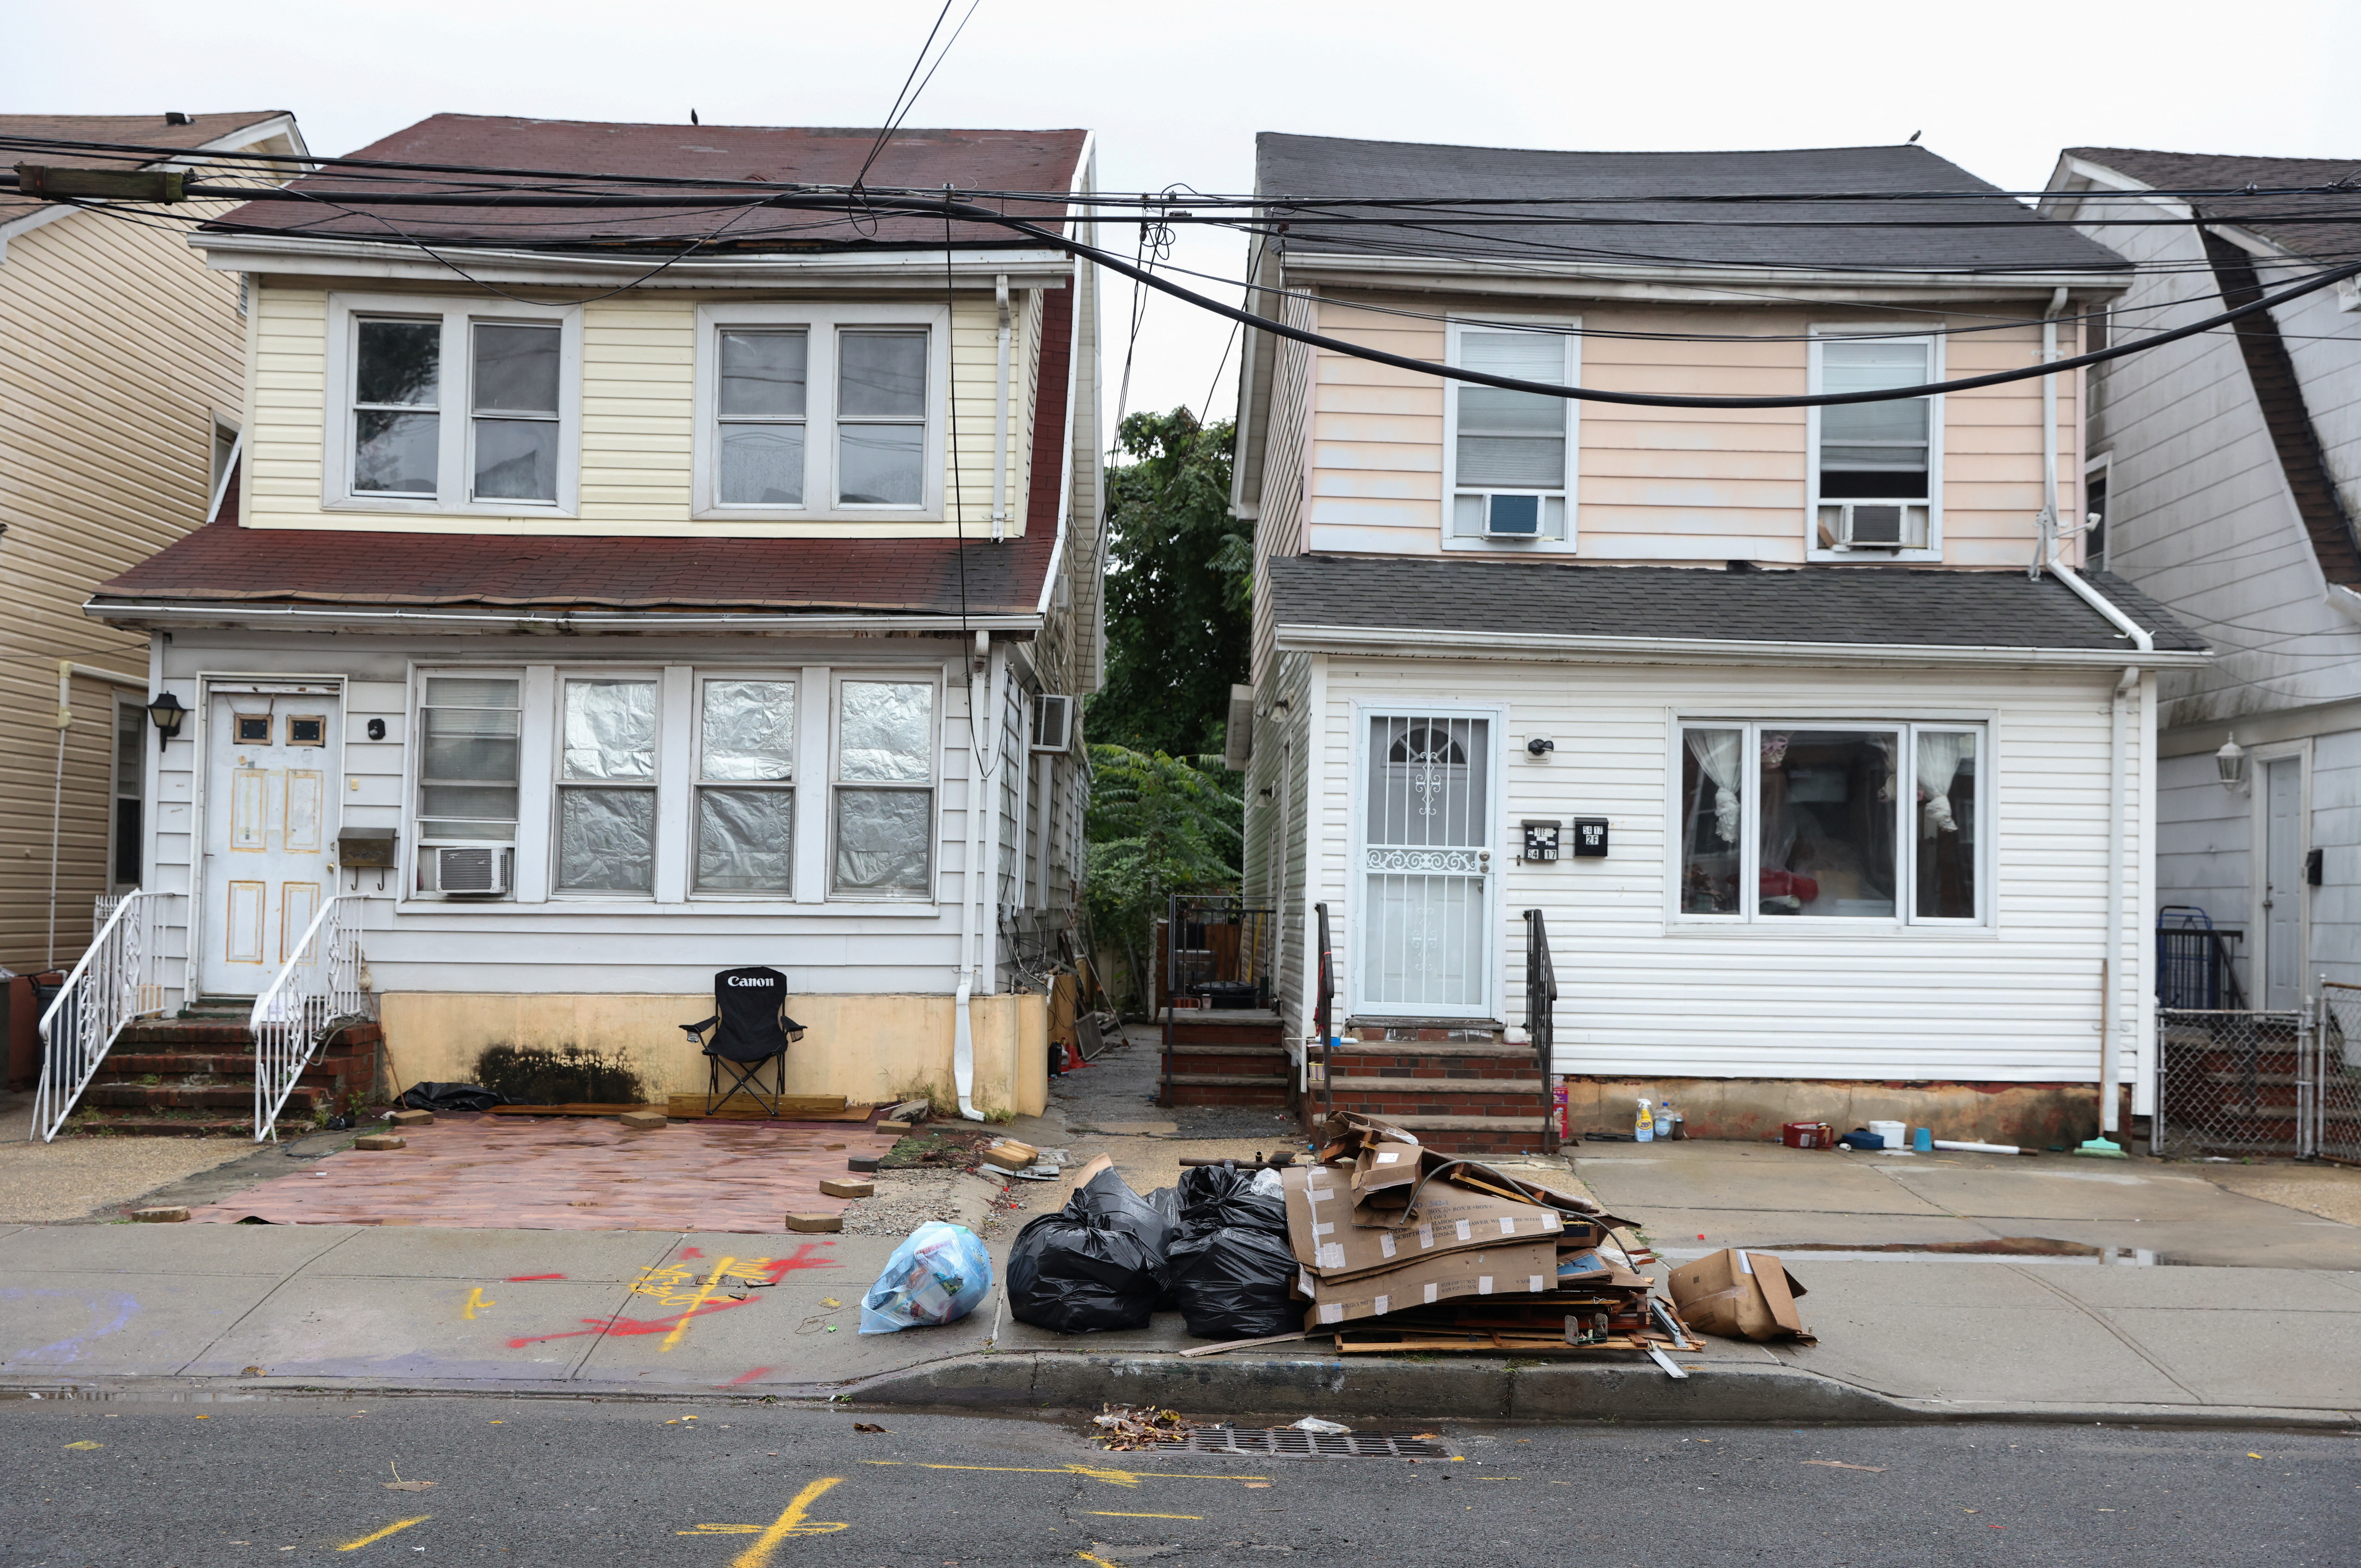 Damage from flooding during the aftermath of Hurricane Ida is still being cleaned up in Queens, during a Nor’easter in New York